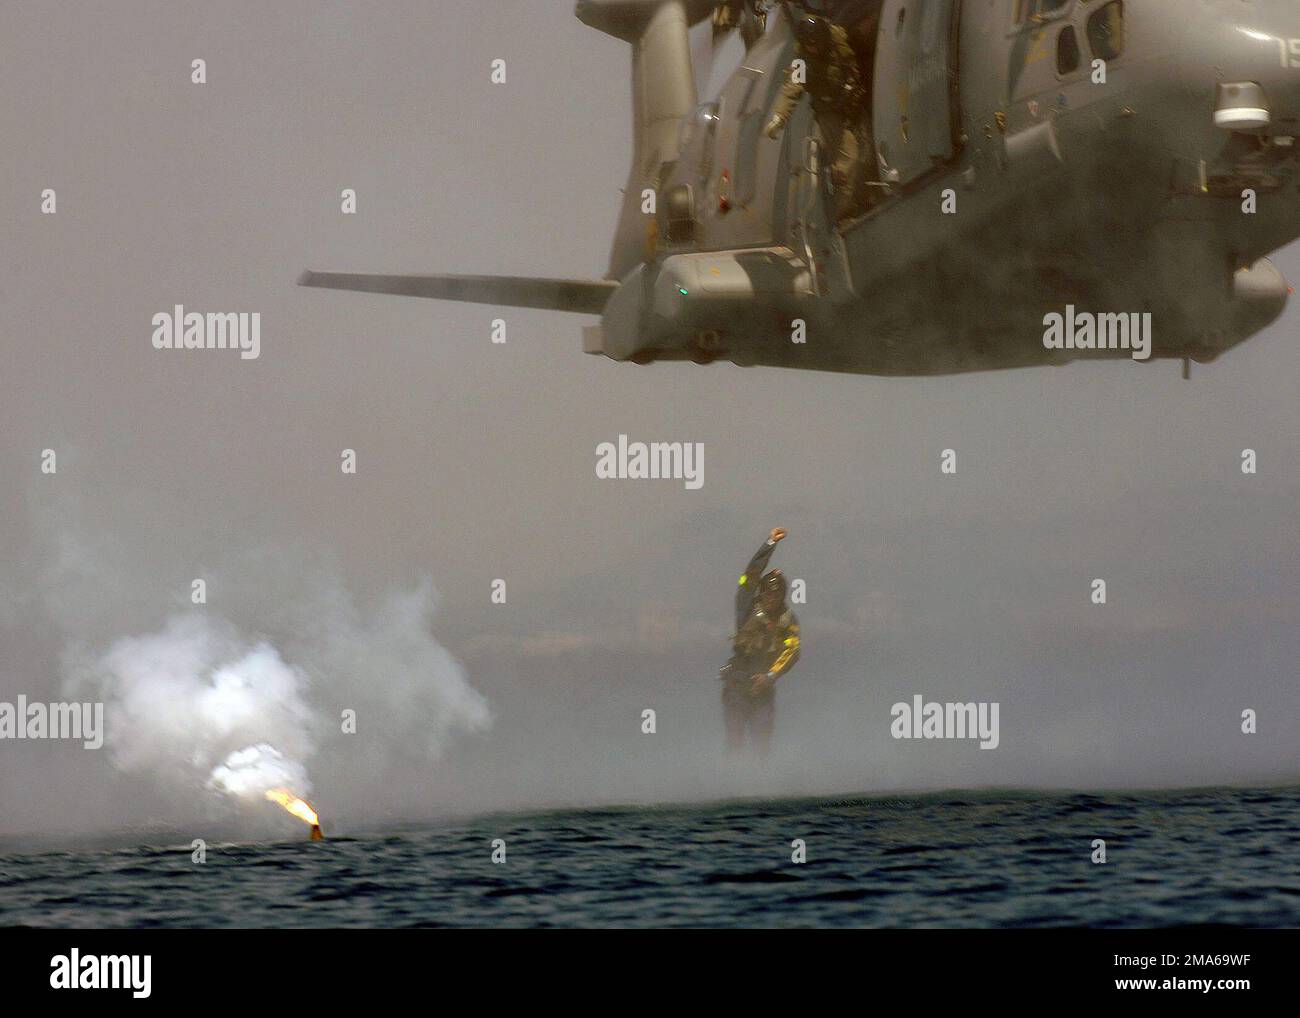 050624-N-1464F-036. [Complete] Scene Caption: A diver assigned to the Italian Submarine Parachute Advisory Group (SPAG) jumps out of a Marina Militare EH-101 Shark helicopter to assist Sailors that escaped from their submarine, in Submarine Escape and Immersion Equipment (SEIE) MK-10 suits, during the North Atlantic Treaty Organization (NATO) Submarine Escape and Rescue (SERS) Exercise SORBET ROYAL 2005. Divers from various nations will work together to rescue submariners during the exercise in the Mediterranean. Twenty-seven participating nations, including 14 NATO nations will test their cap Stock Photo